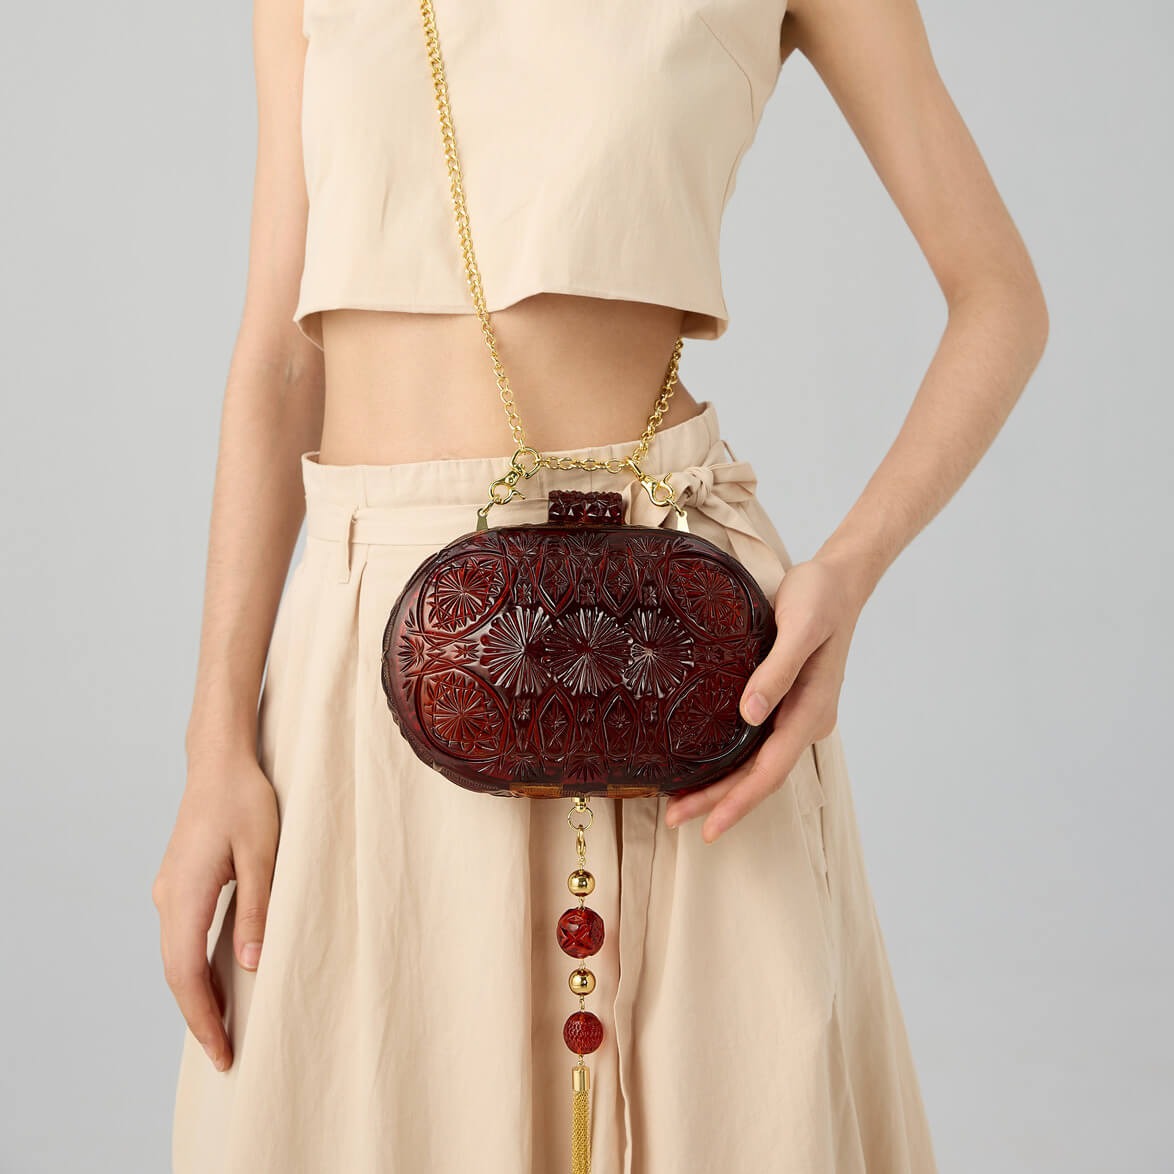 NEW IN Intricate Oval Clutch Amber